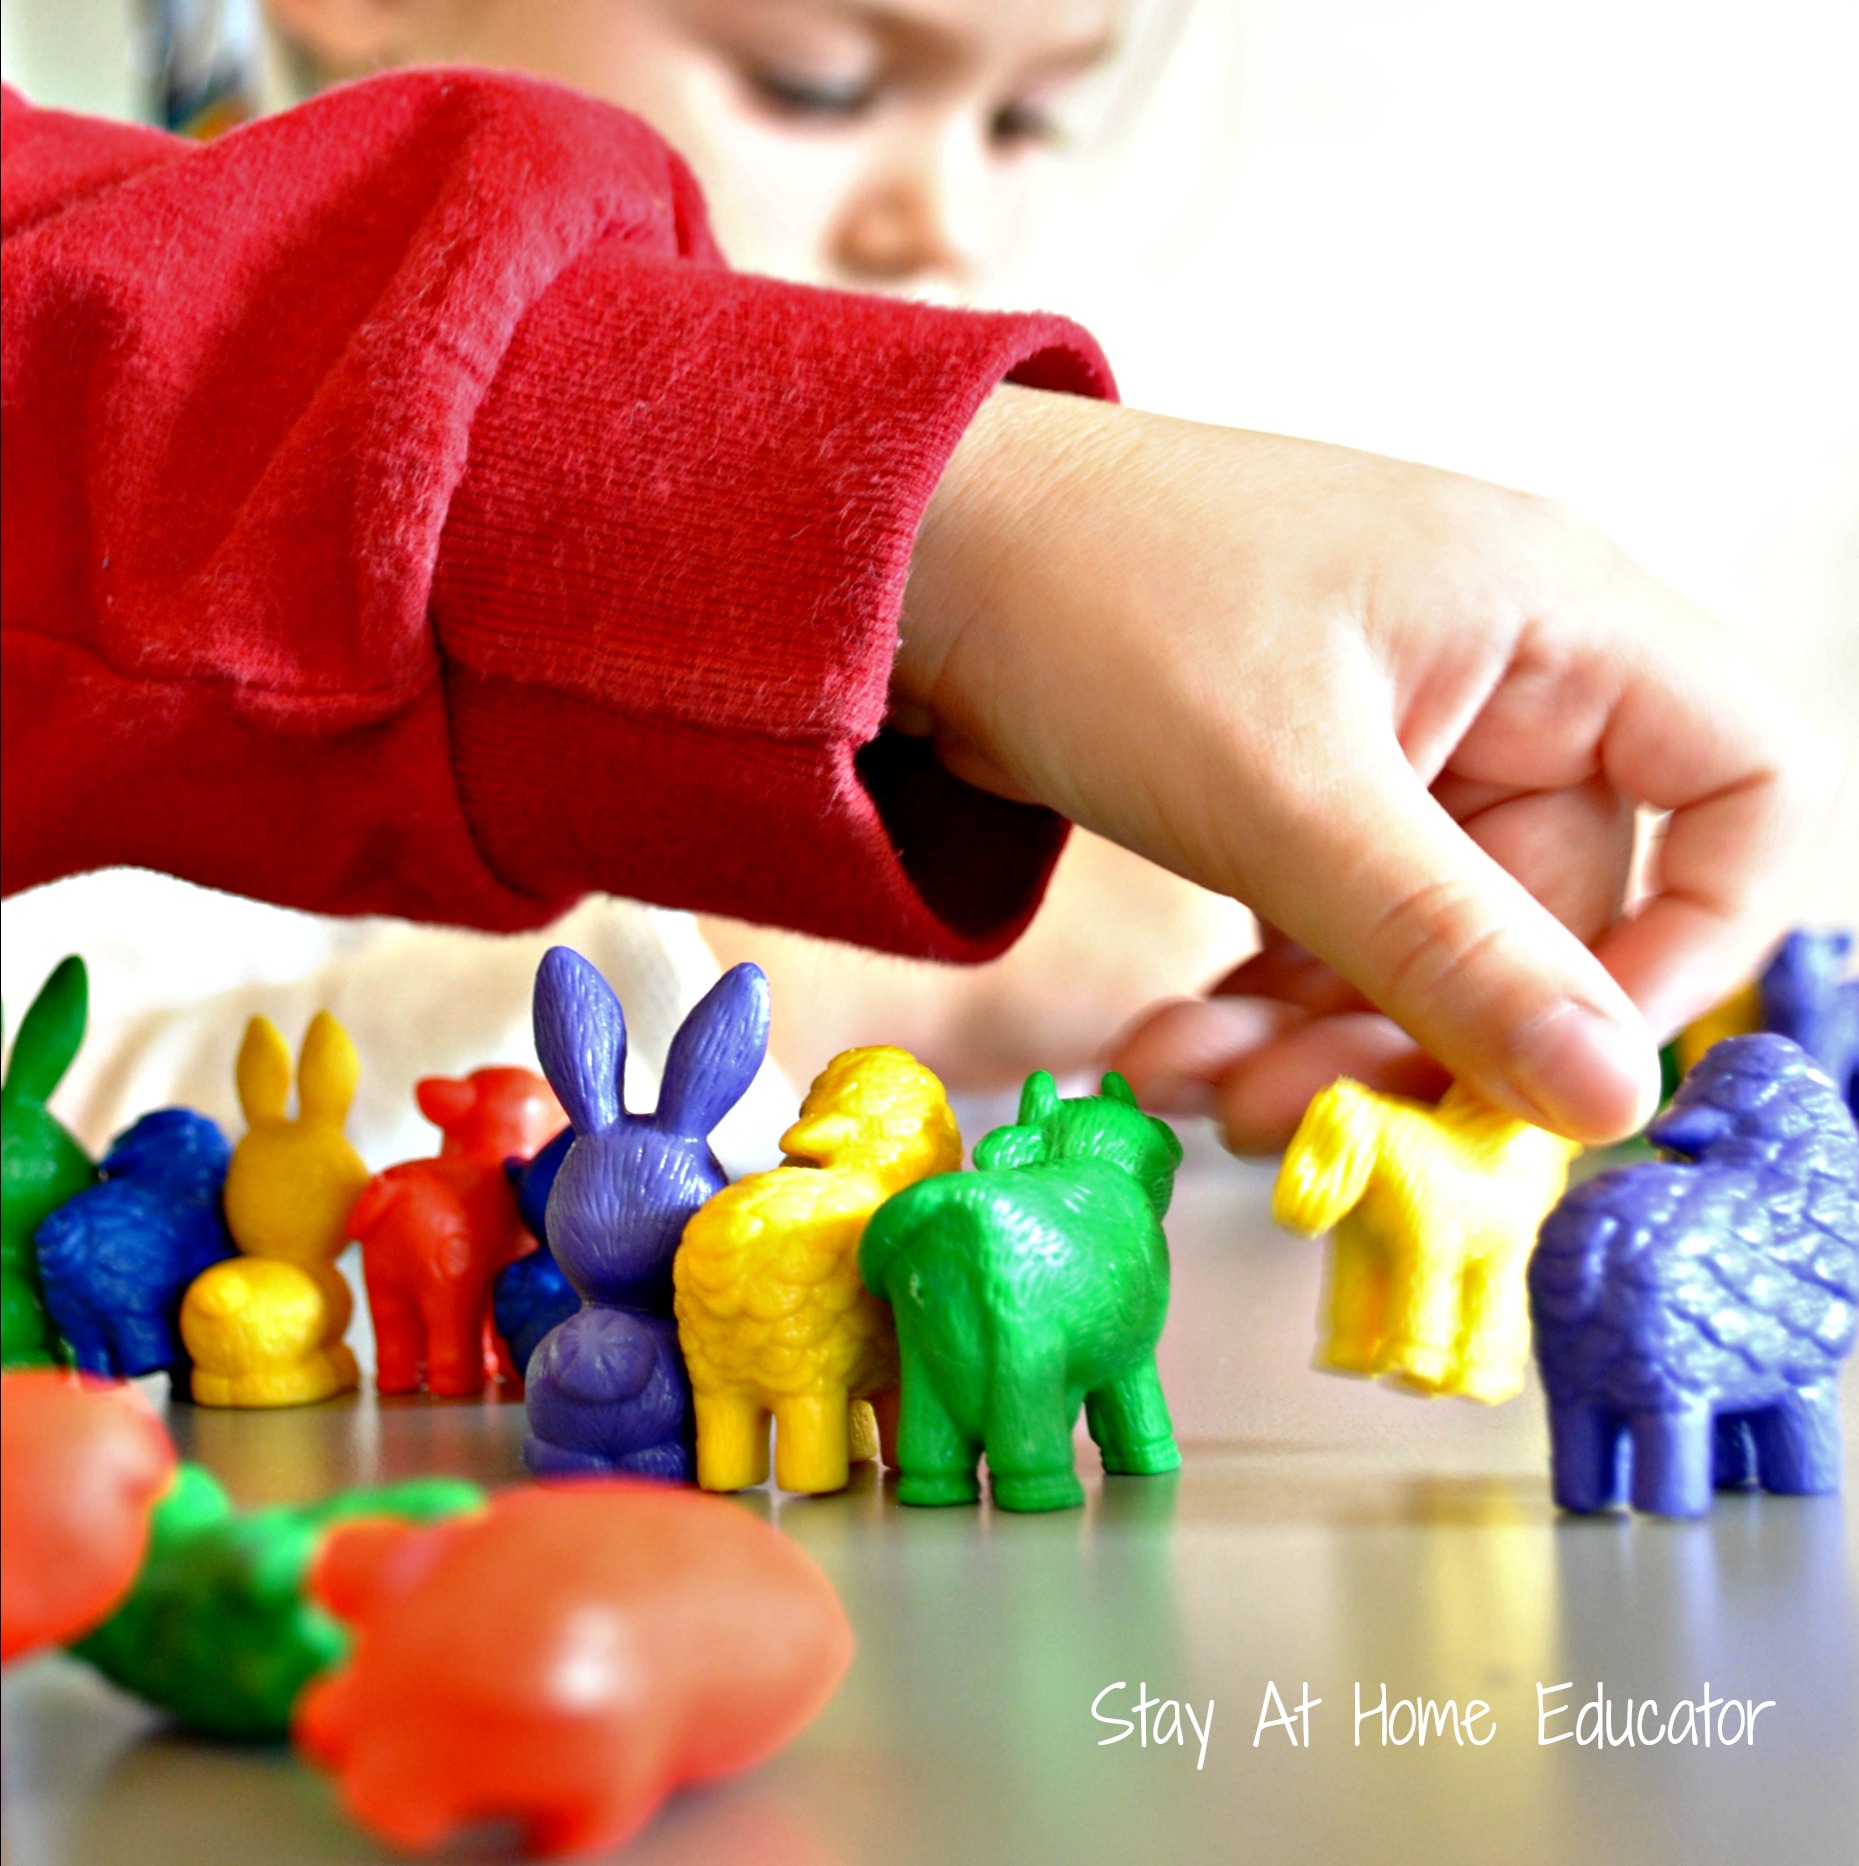 Farm animal free play in preschool activity - Stay At Home Educator